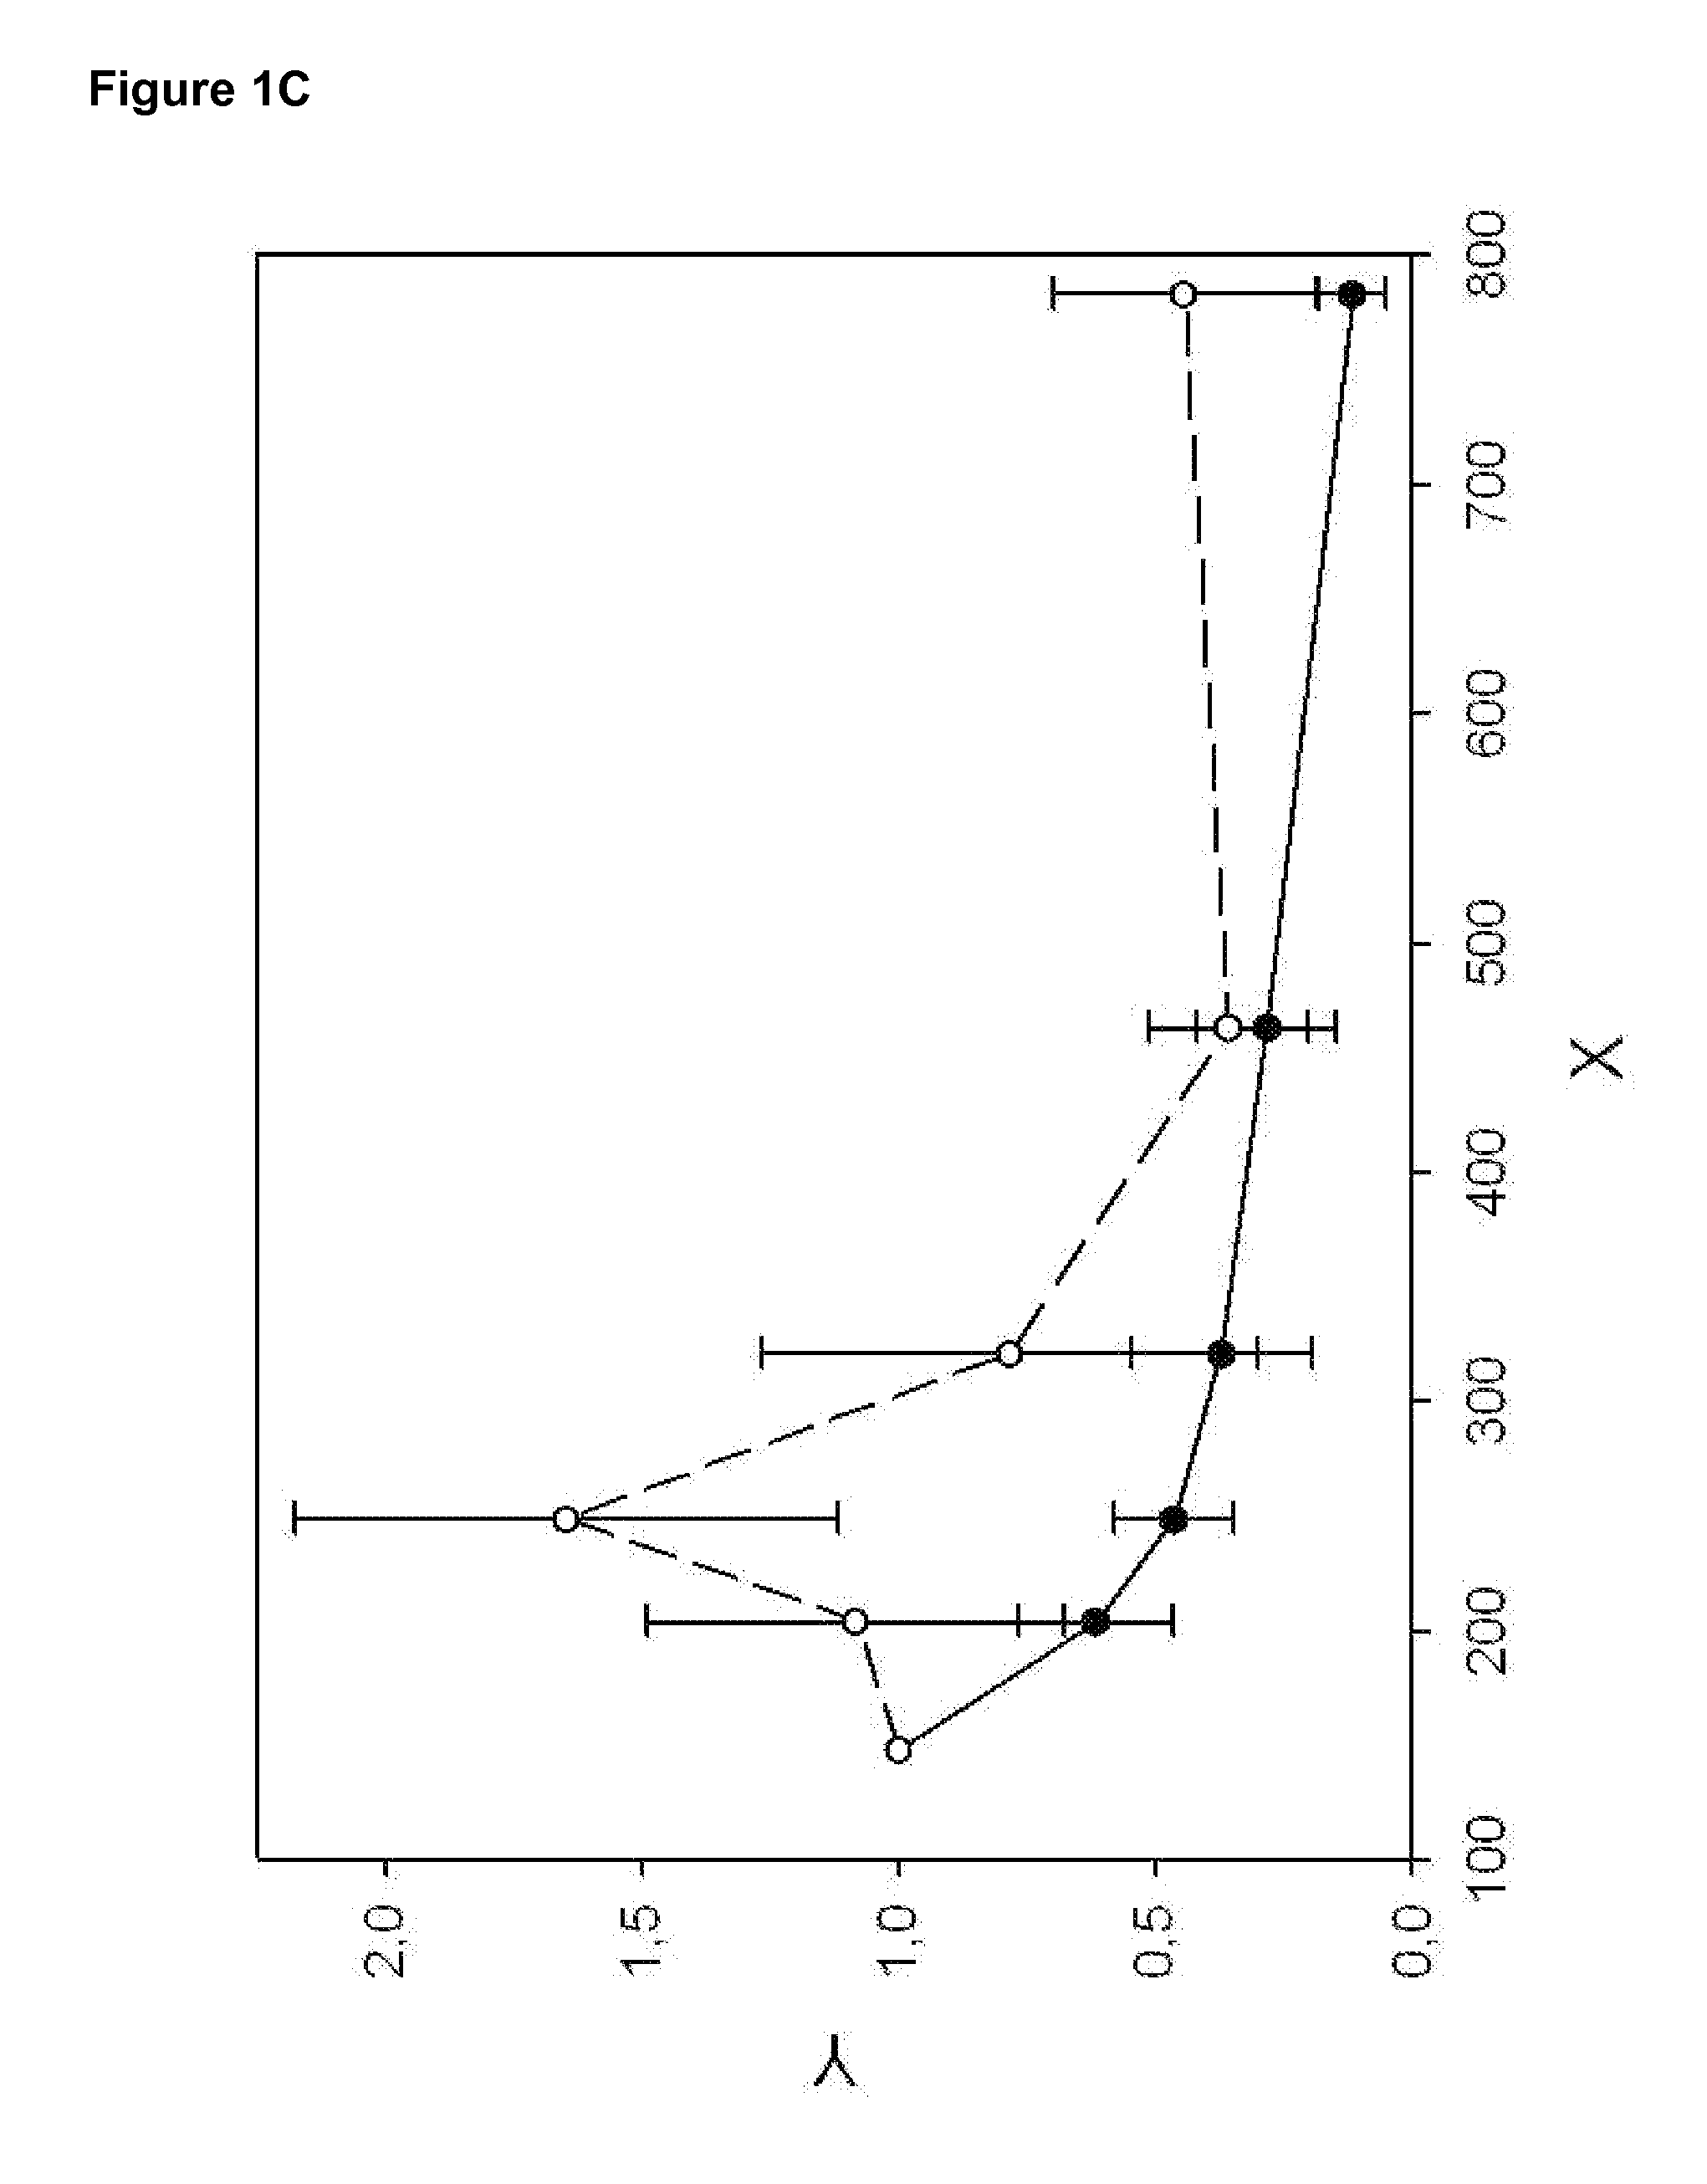 Method for diagnosis of cancer and monitoring of cancer treatments